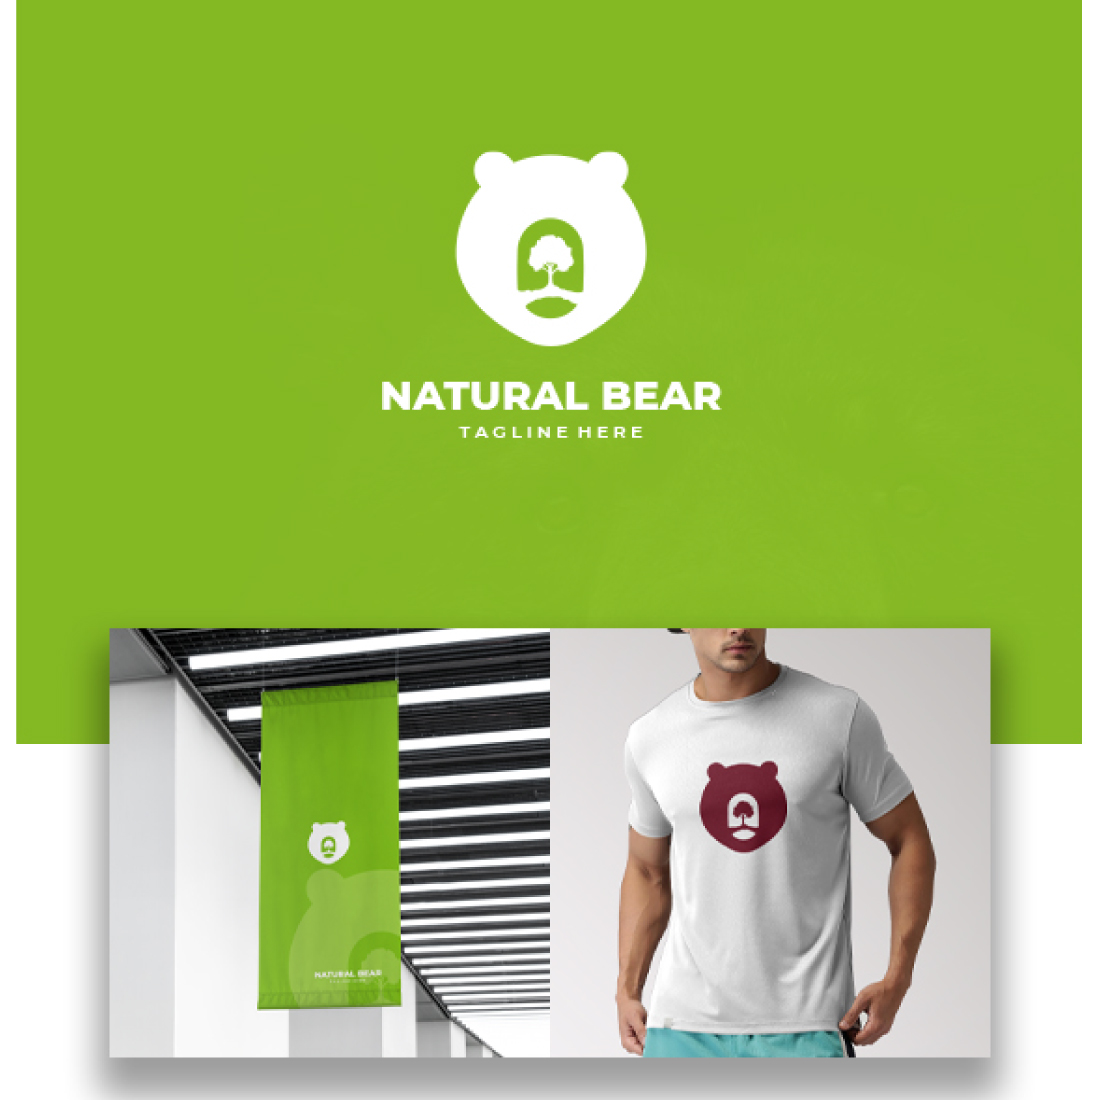 Man wearing a white shirt with a bear on it.